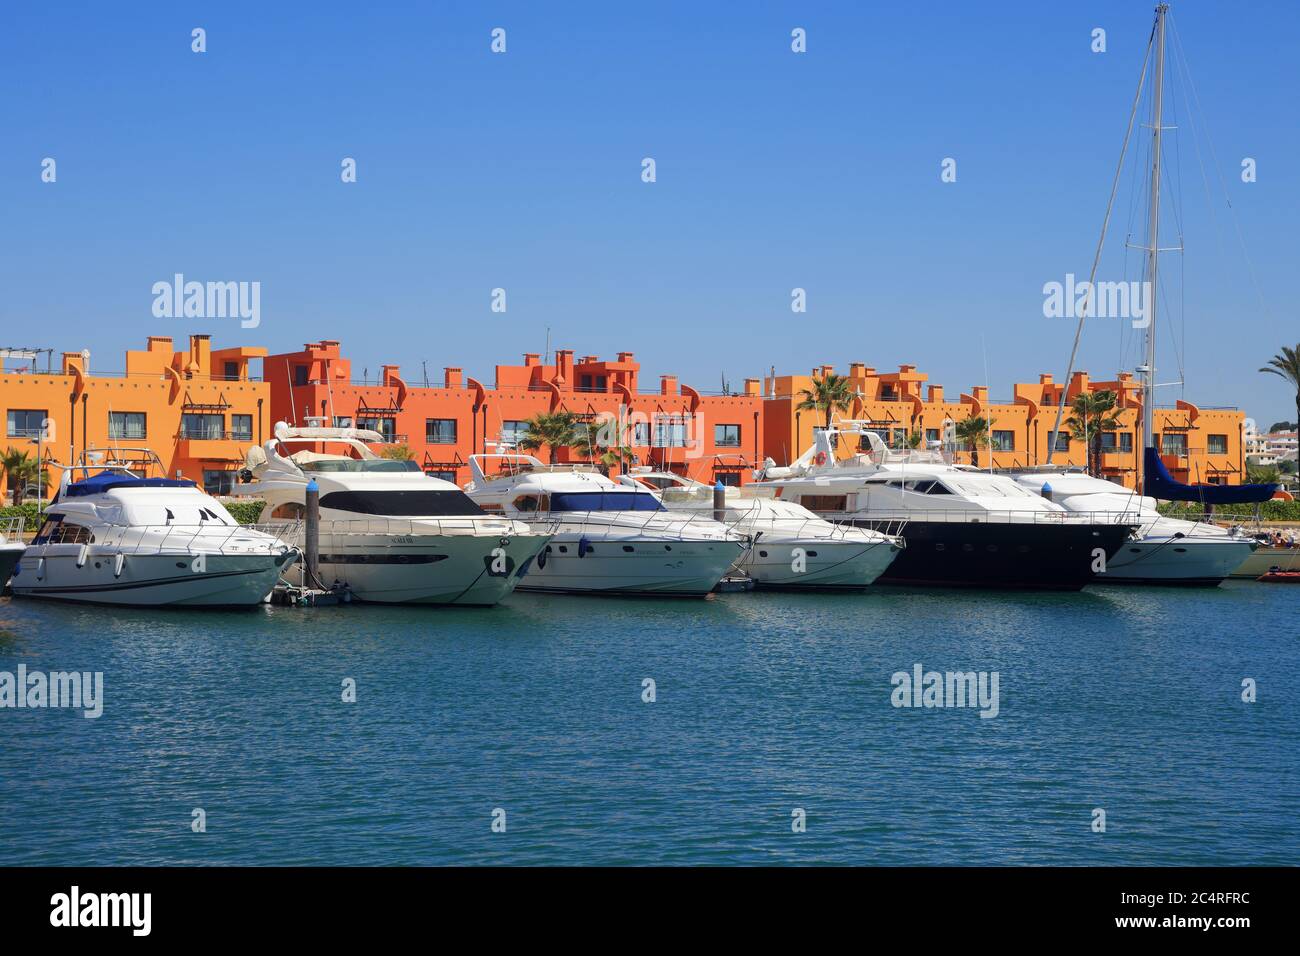 PORTIMAO, PORTUGAL. A row of luxury yachts berthed in front of colourful apartments in the Portimao Marina, located in the Algarve. Stock Photo